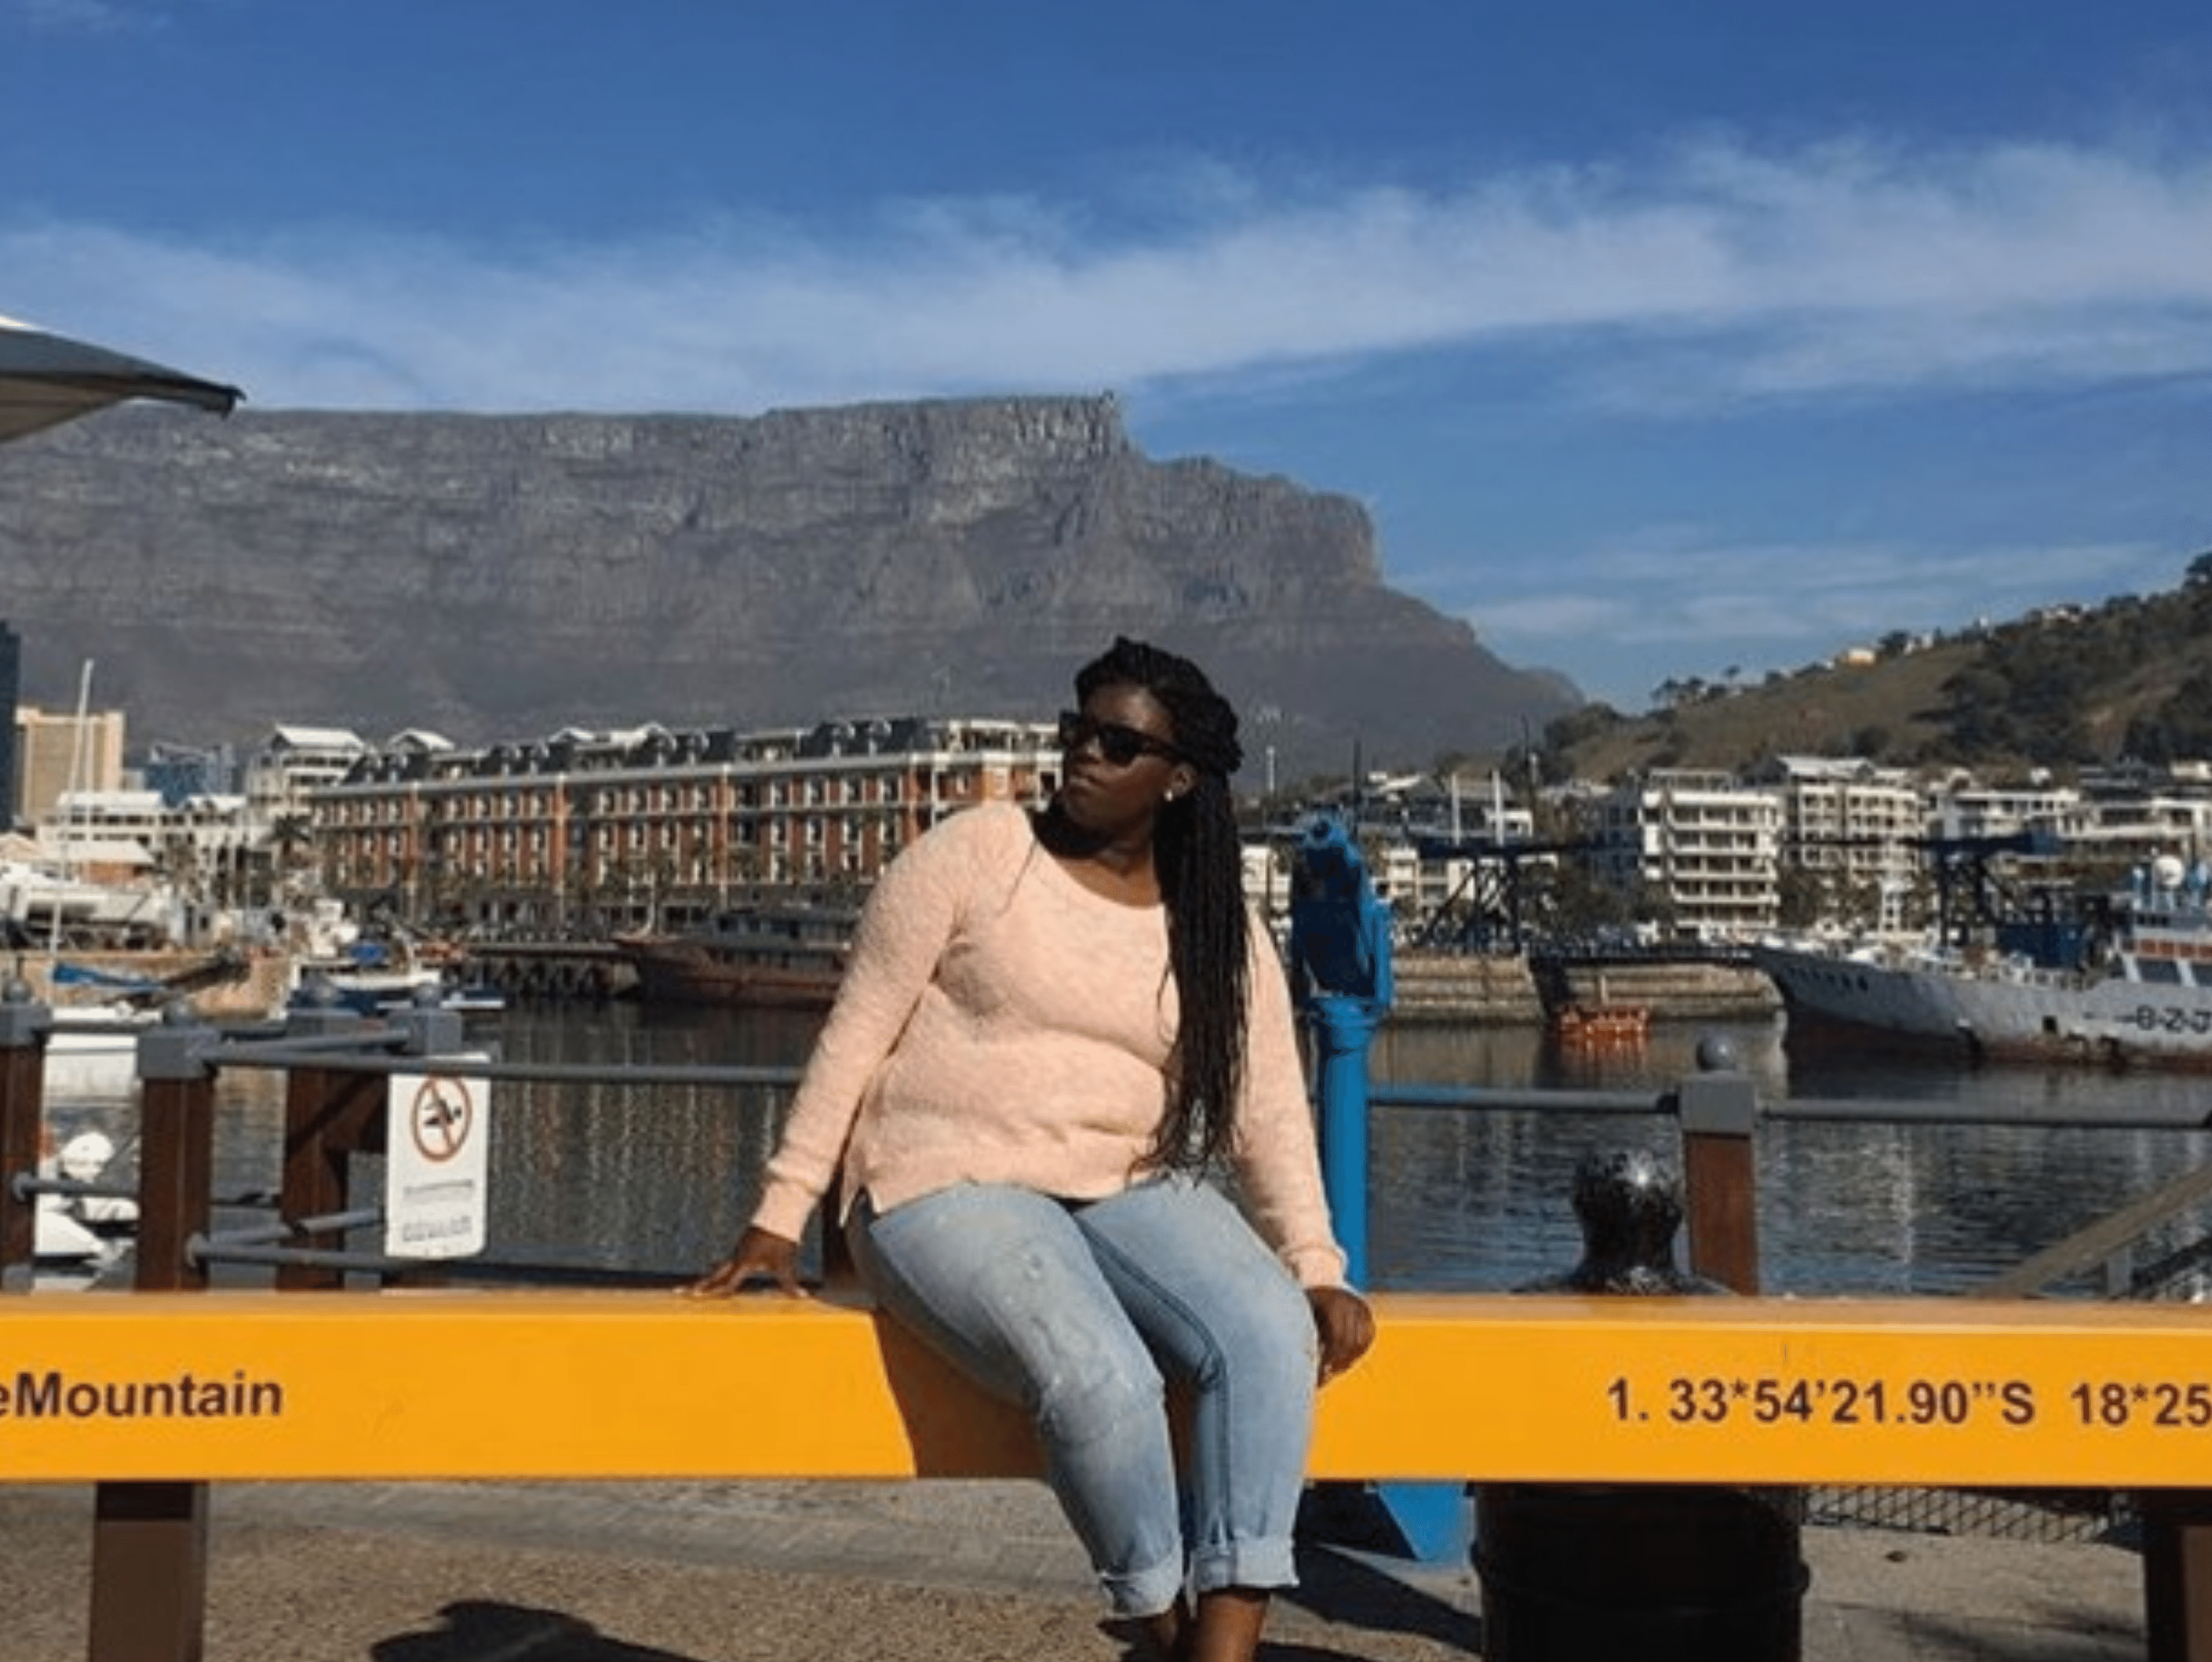 I AM Black History: Quick Tips from a Black Female Traveler